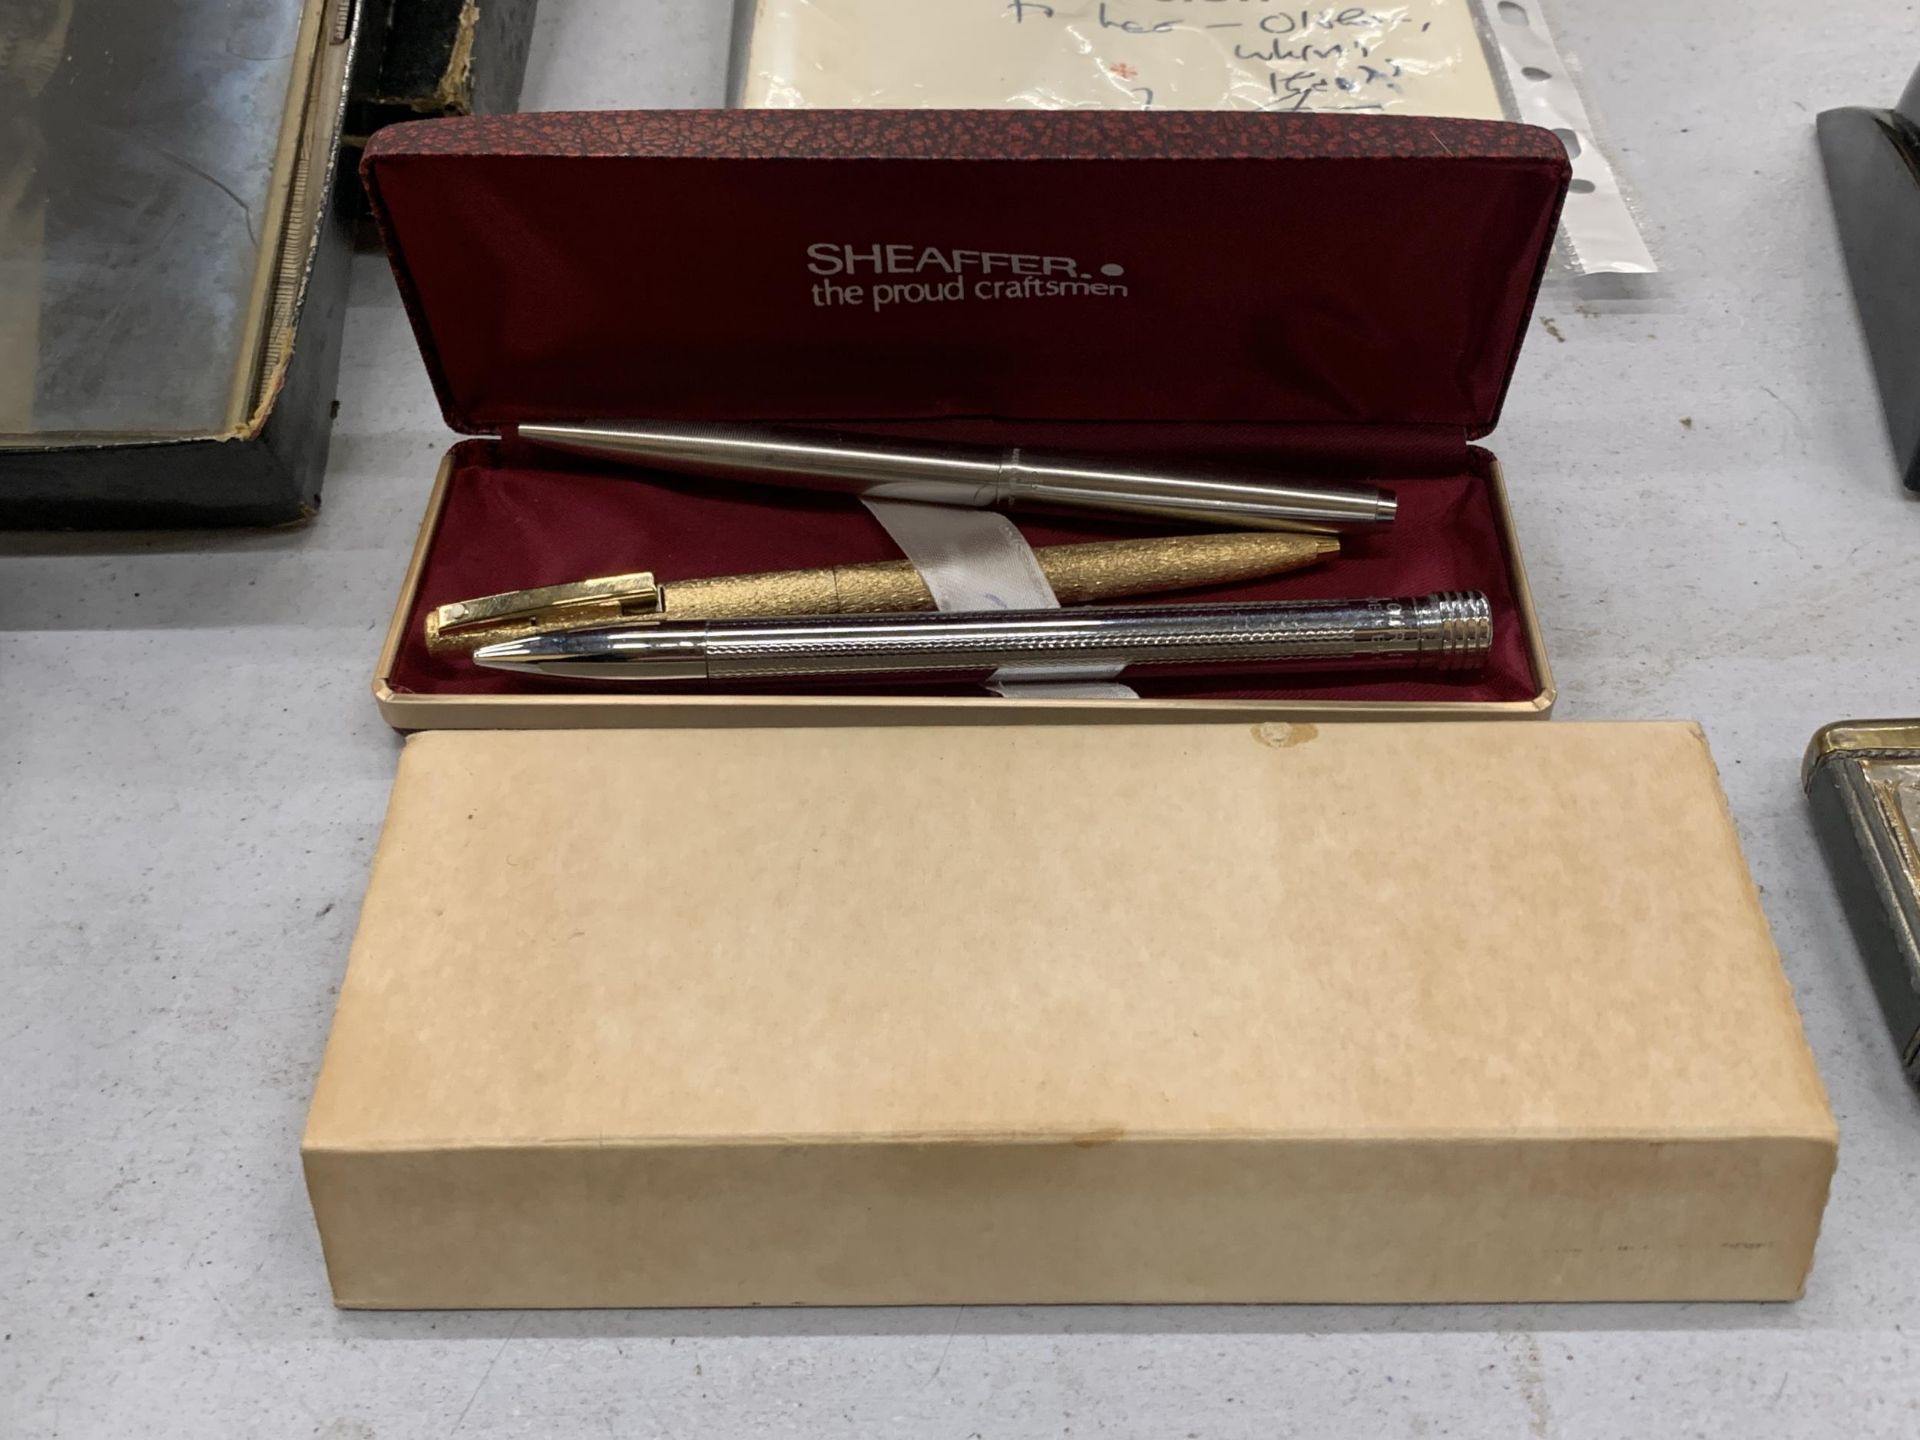 A BOXED SHEAFFER PEN AND FURTHER PENS - Image 2 of 2